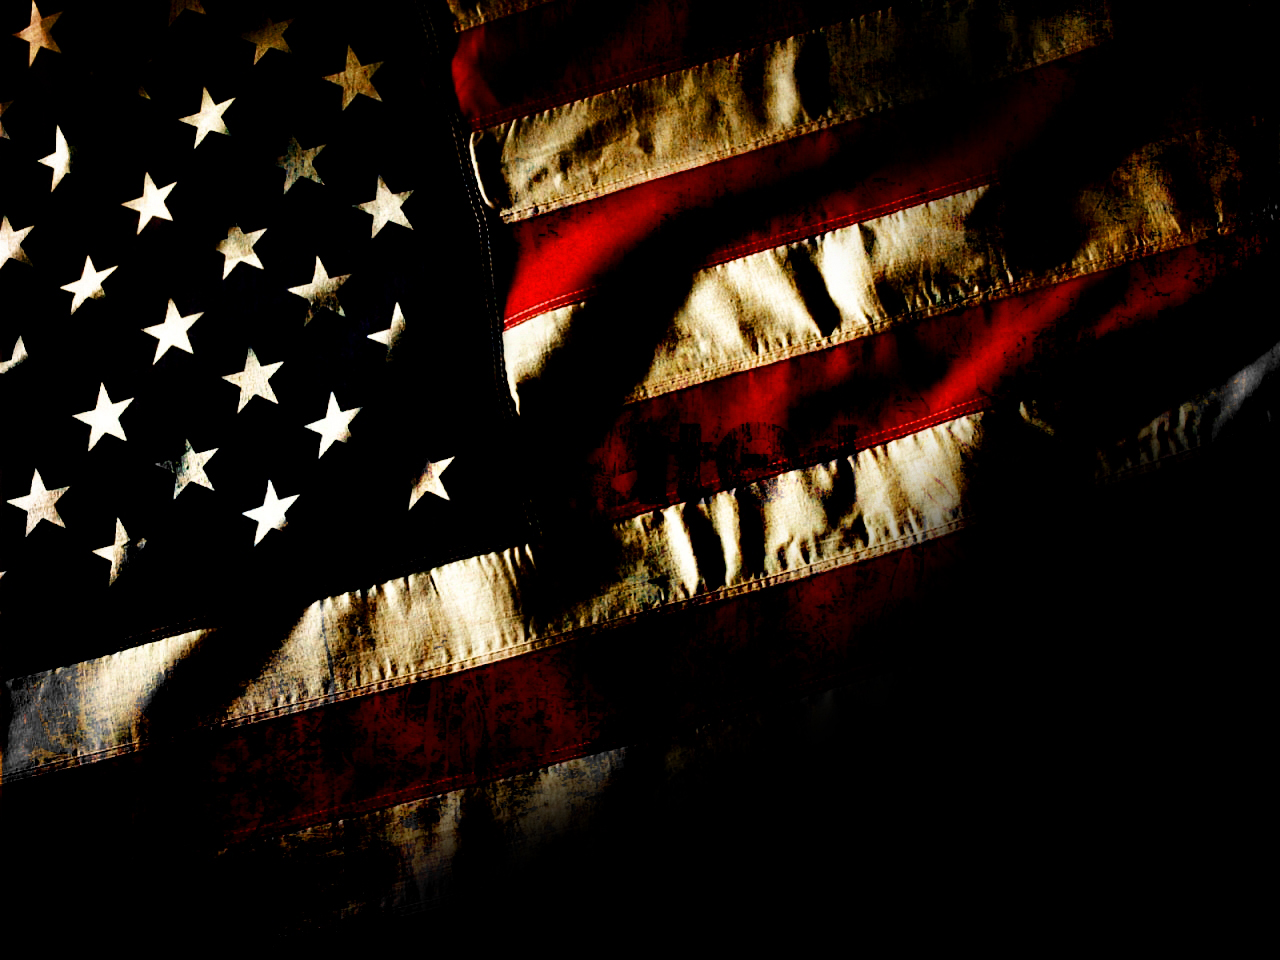 US Flag in Black and Red Dark Spectacular Mobile Phone Wallpaper Patriotic  Vertical Background or Backdrop Stock Photo  Image of black patriotic  222395922